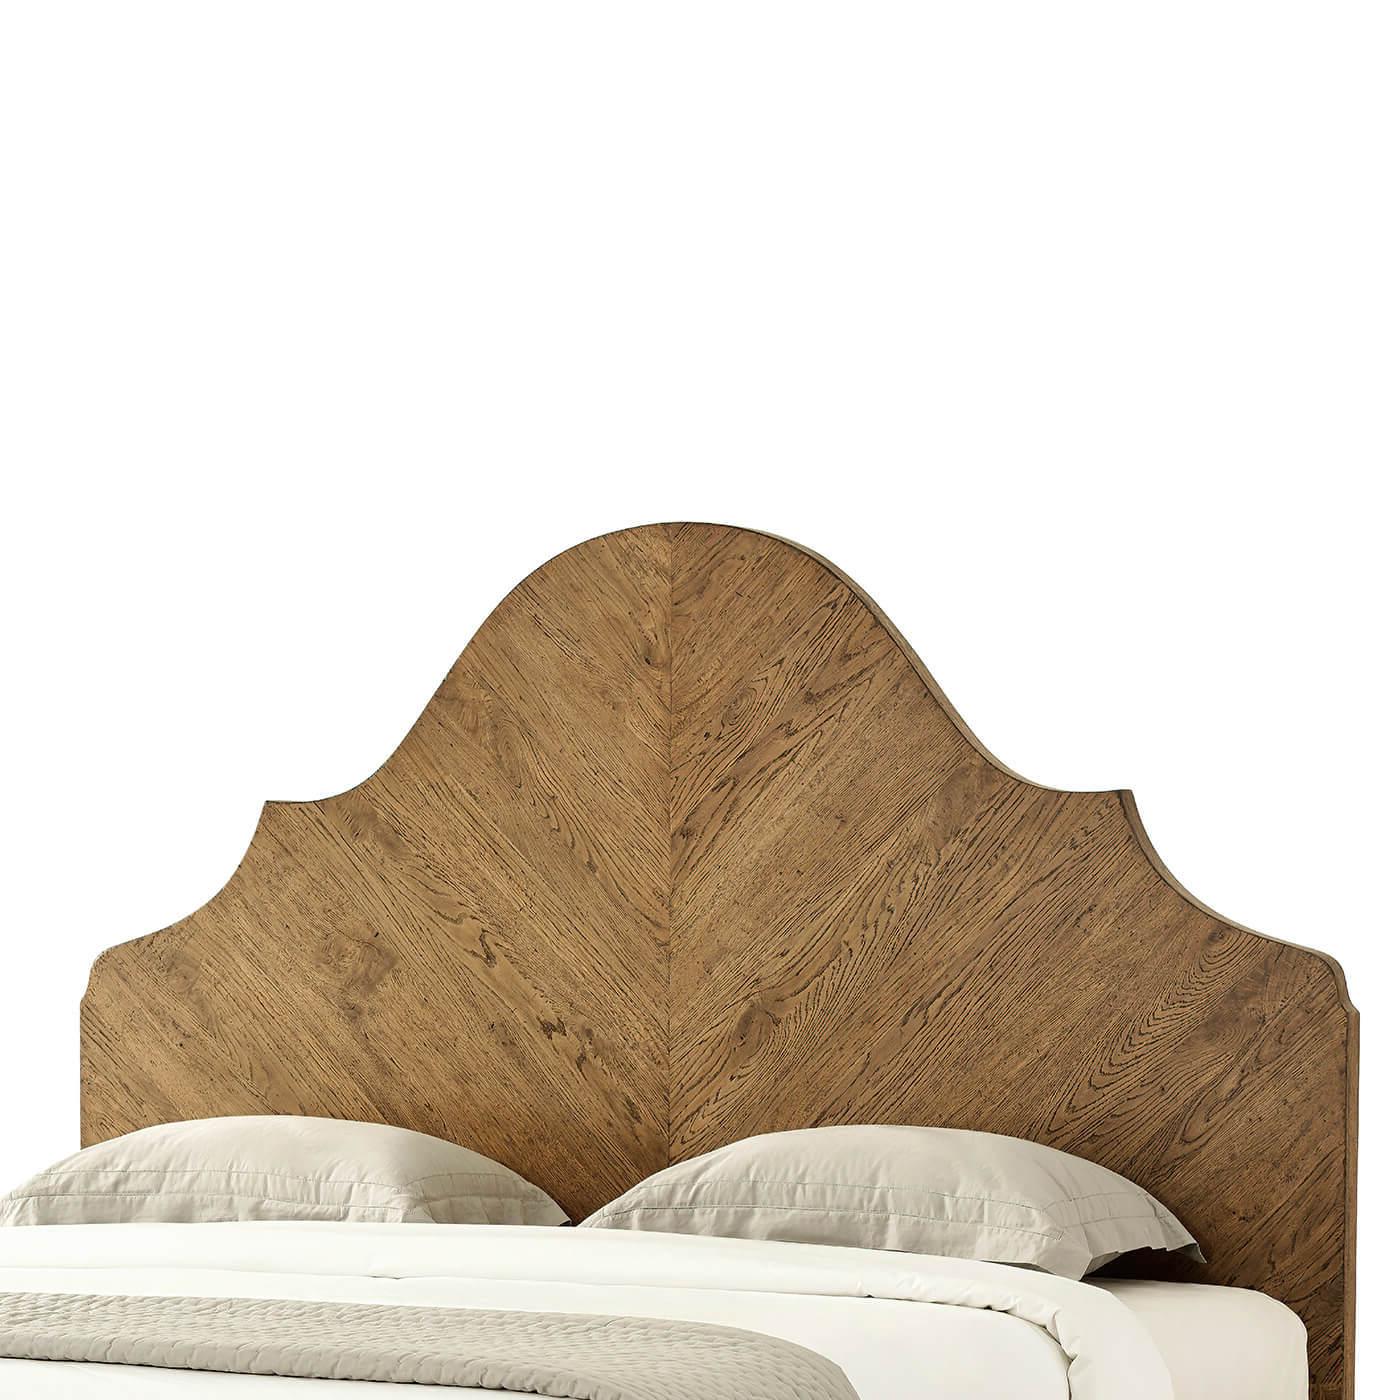 A modern rustic-style oak California king bed with an arched headboard. This artfully crafted bed has been hand-veneered. It has been crafted with rustic oak and is shown in our striking Dawn finish. 

Shown in dawn finish
For CAL. king mattress